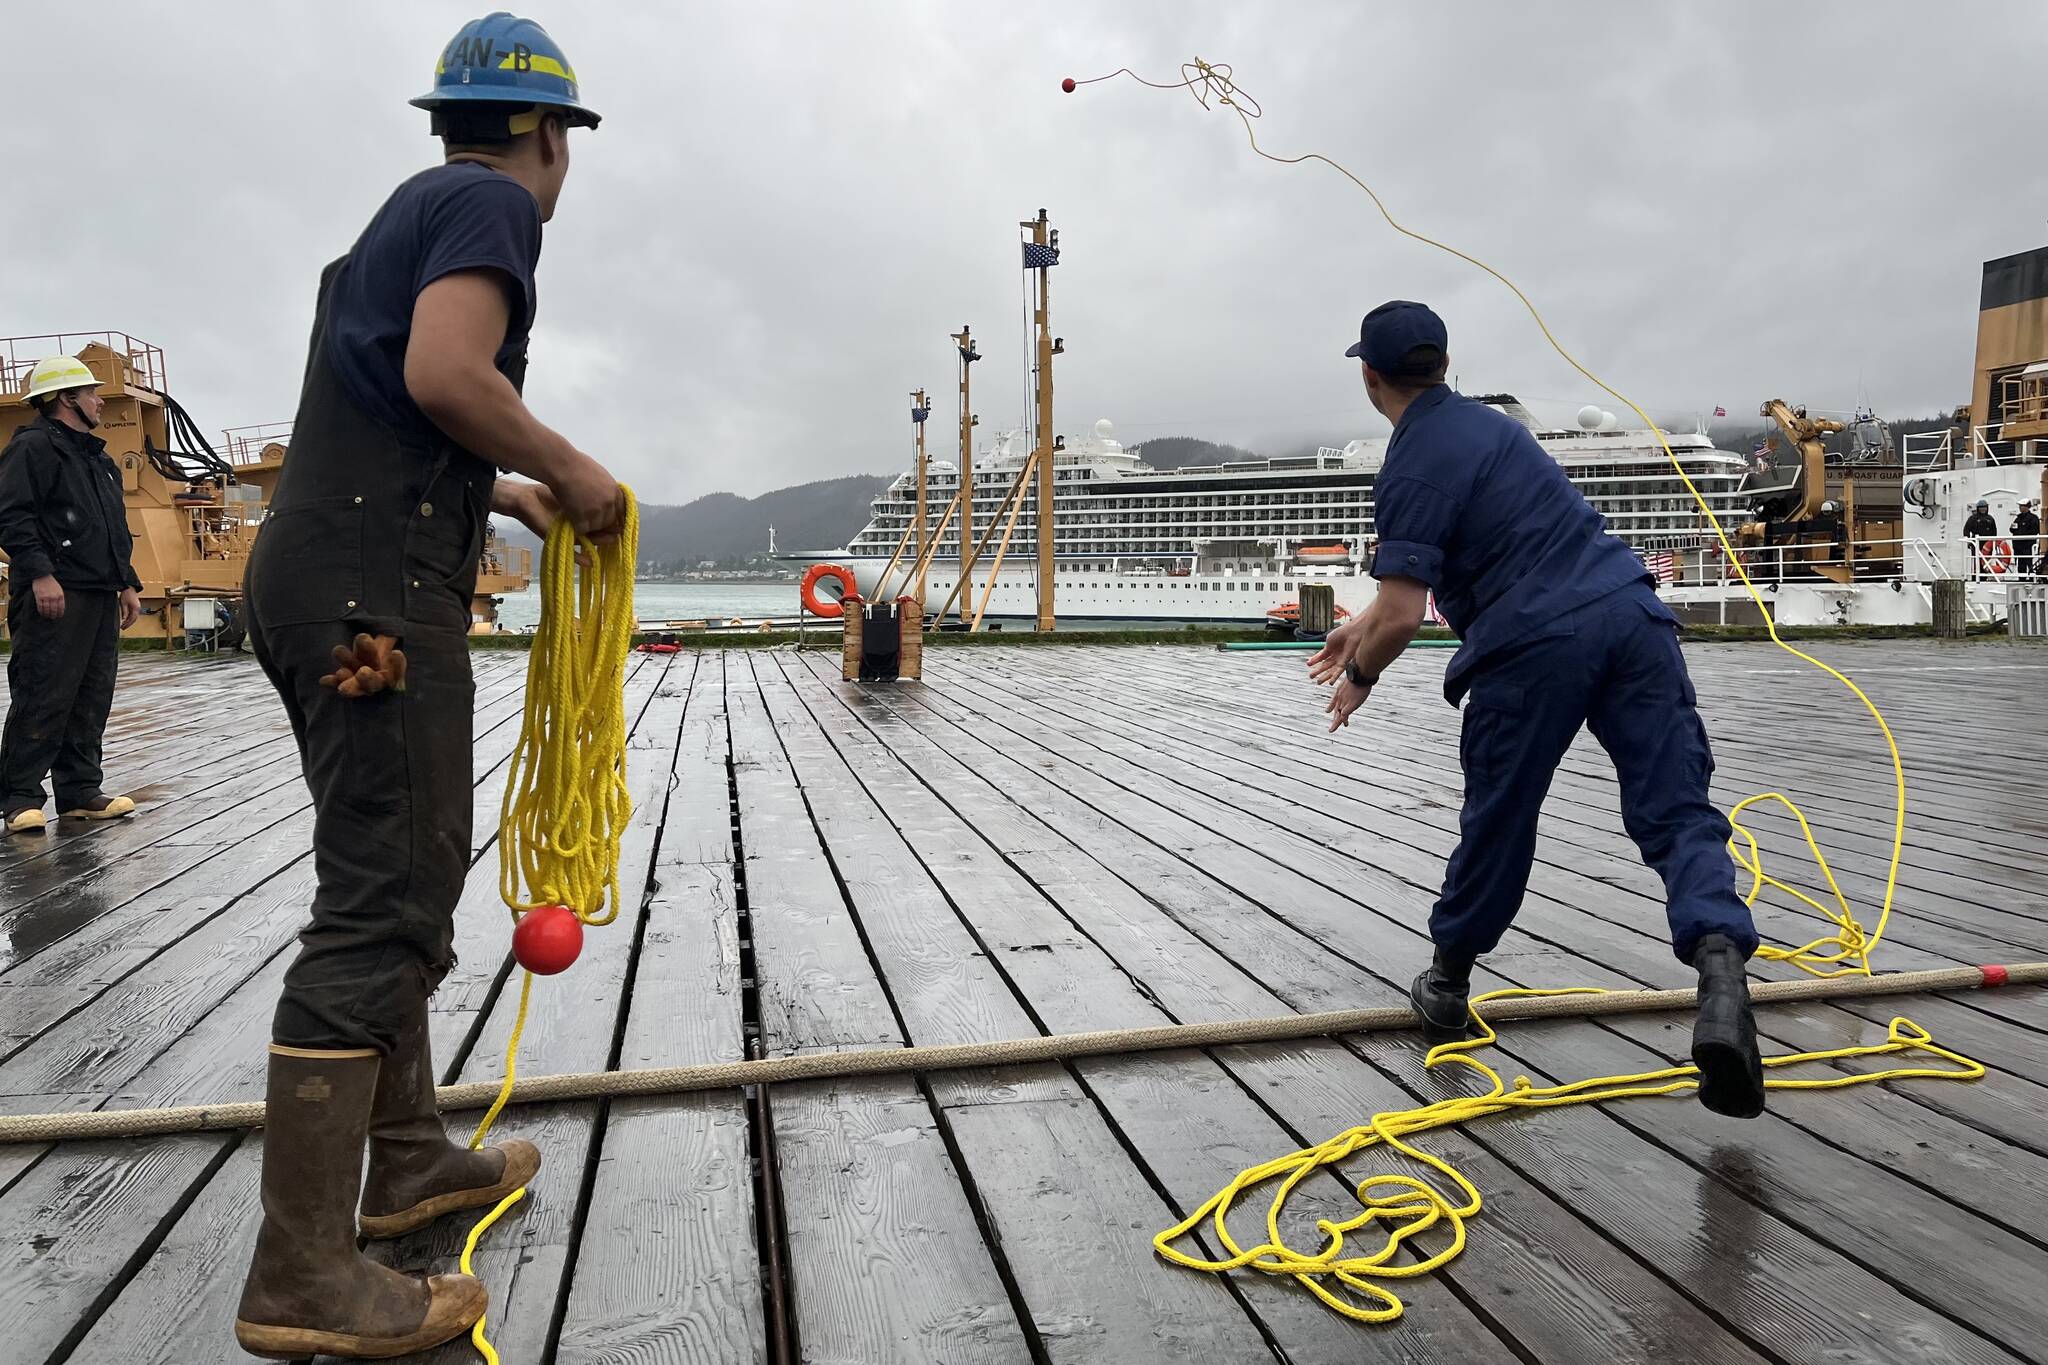 Team Fir competes in the line throw event which saw each crew member throwing a line across the deck to reach a target, simulating the real life process they undergo to save lives of anyone adrift in the water. (Jonson Kuhn / Juneau Empire)